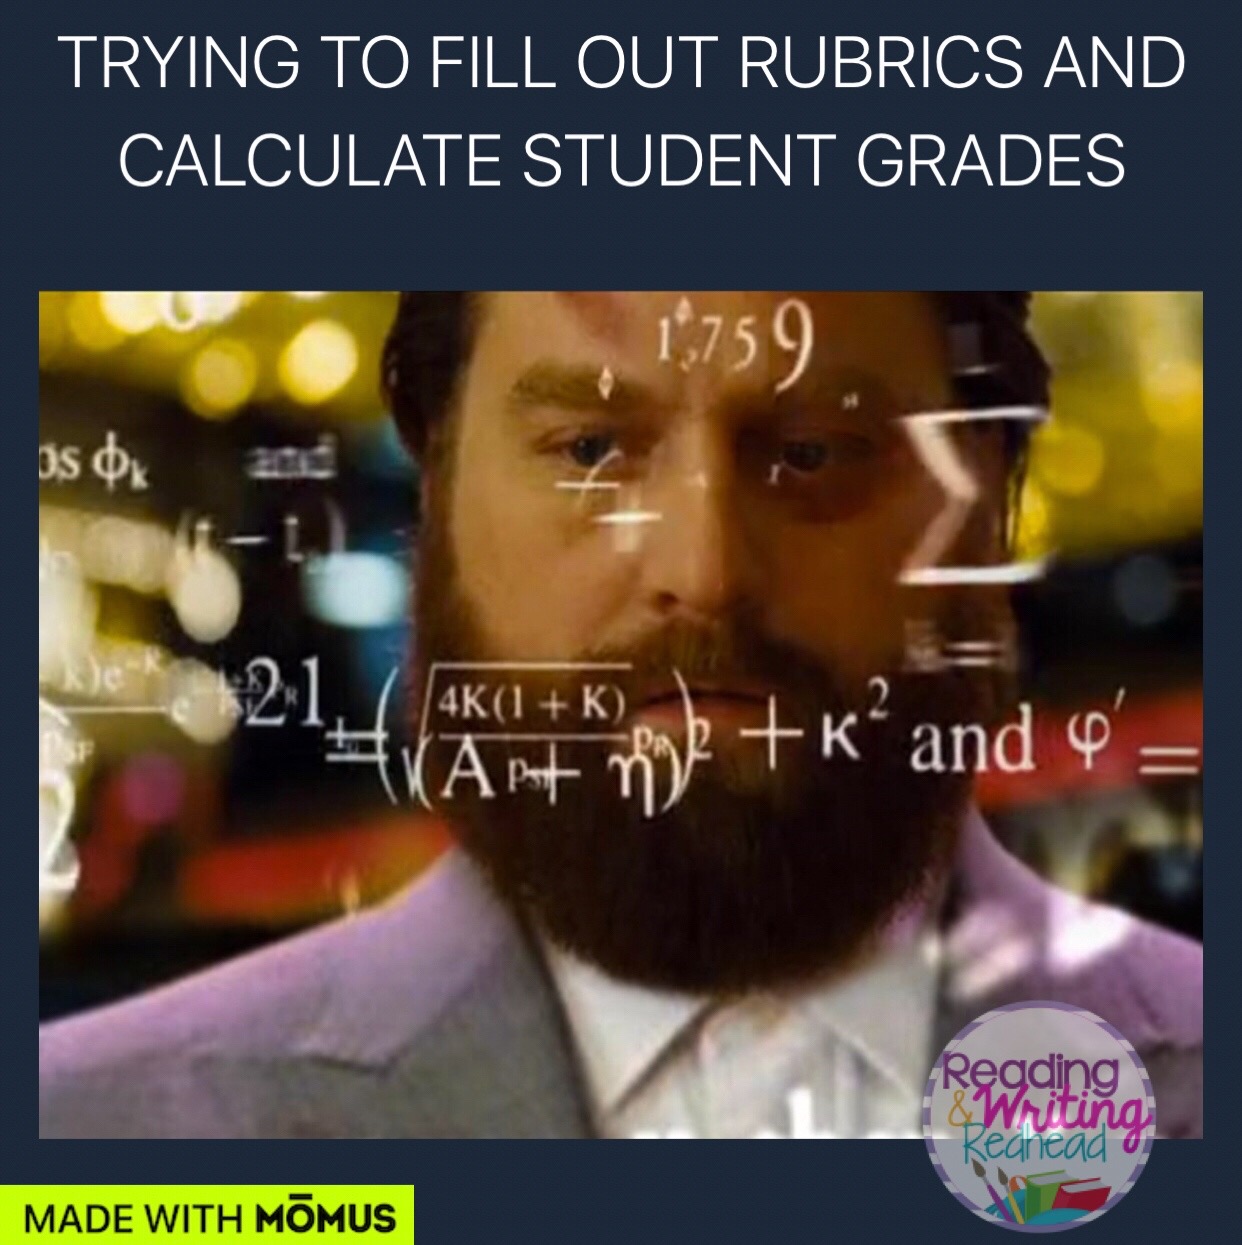 Adult doing difficult math to trying and determine student rubrics and grades